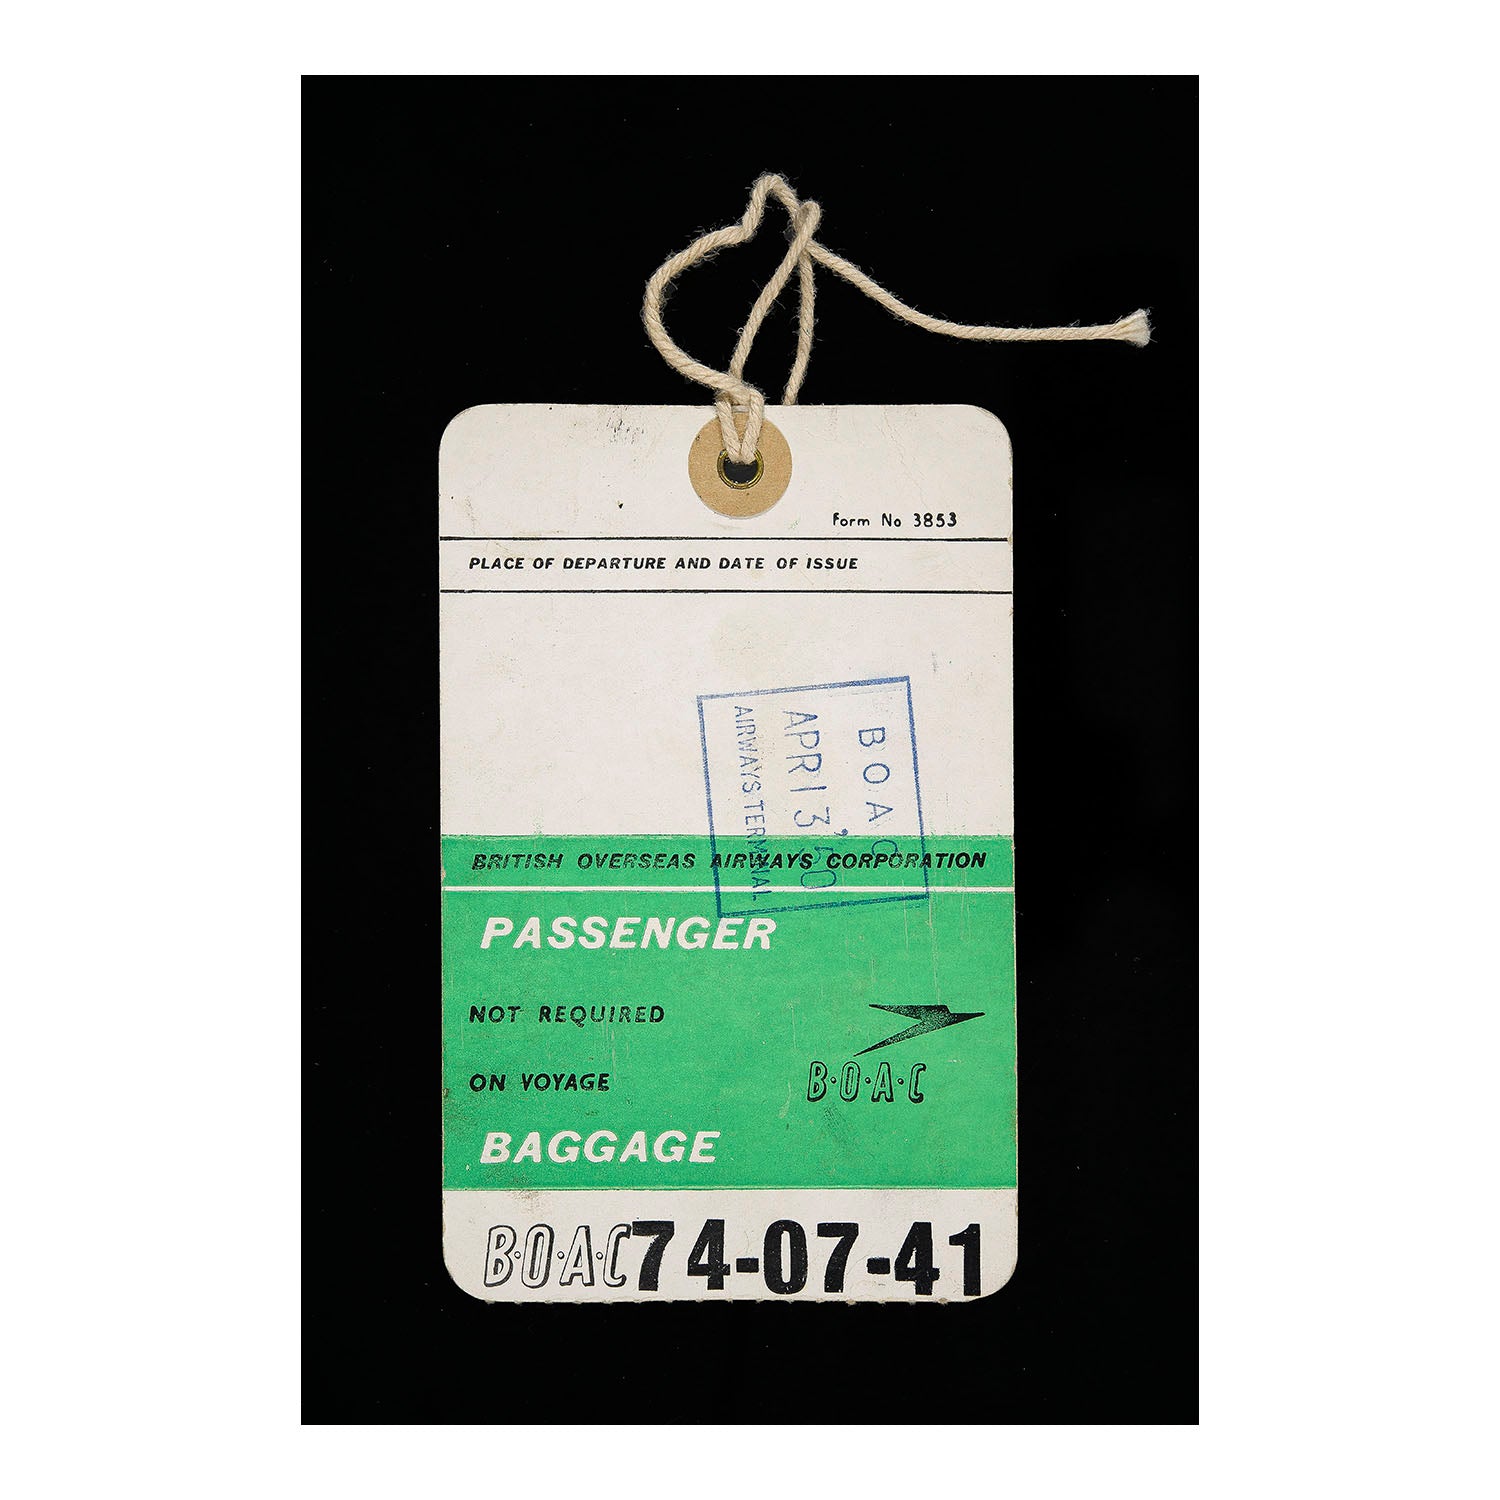 BOAC Luggage Identification (Not Required on Voyage) tag